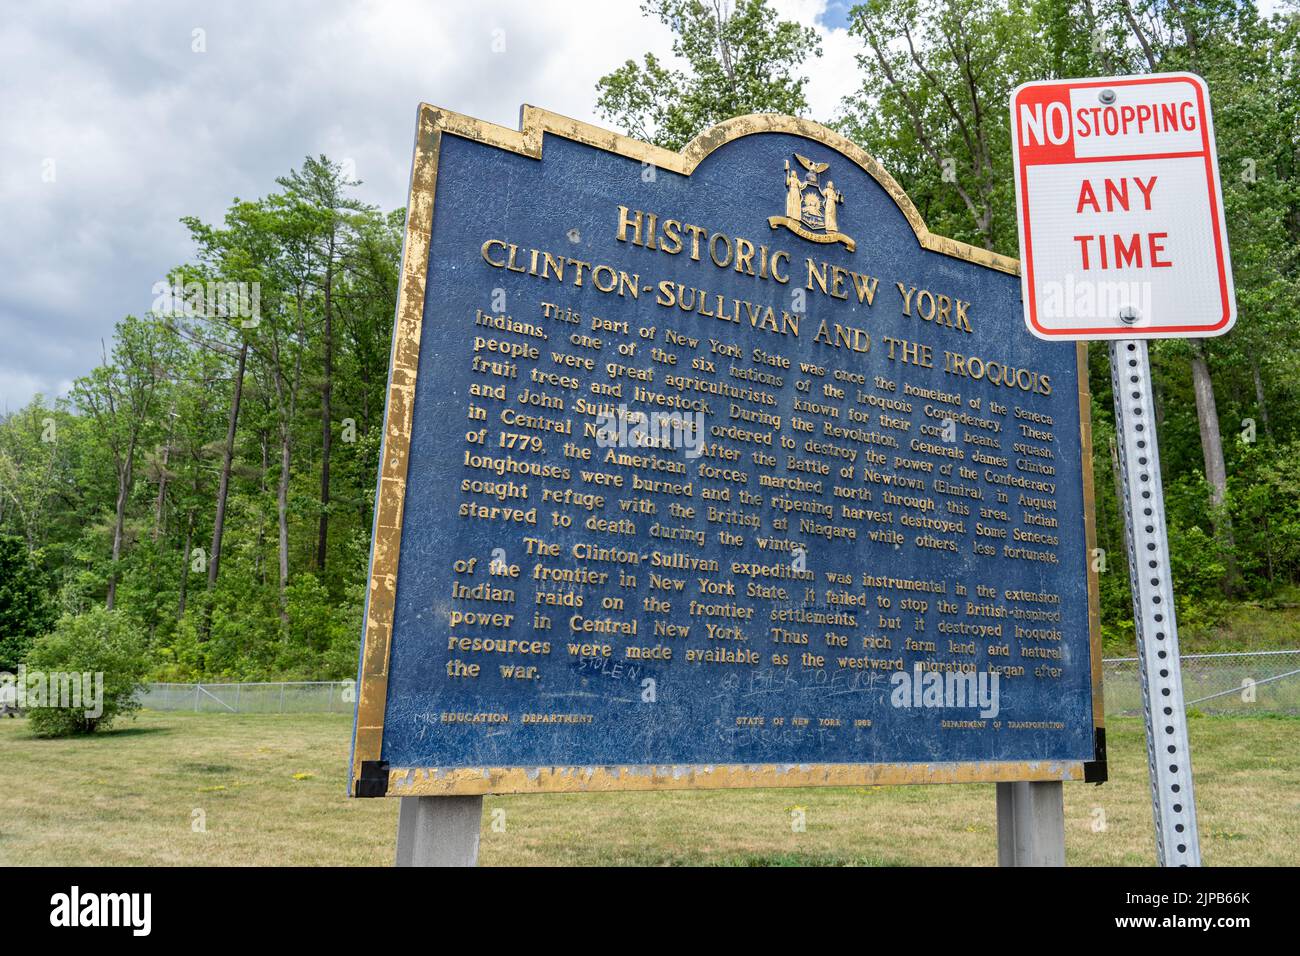 Painted Post, NY - July 28, 2022: Historic New York sign at a rest area on the Southern Tier Expressway tells of Generals James Clinton and John Sulli Stock Photo